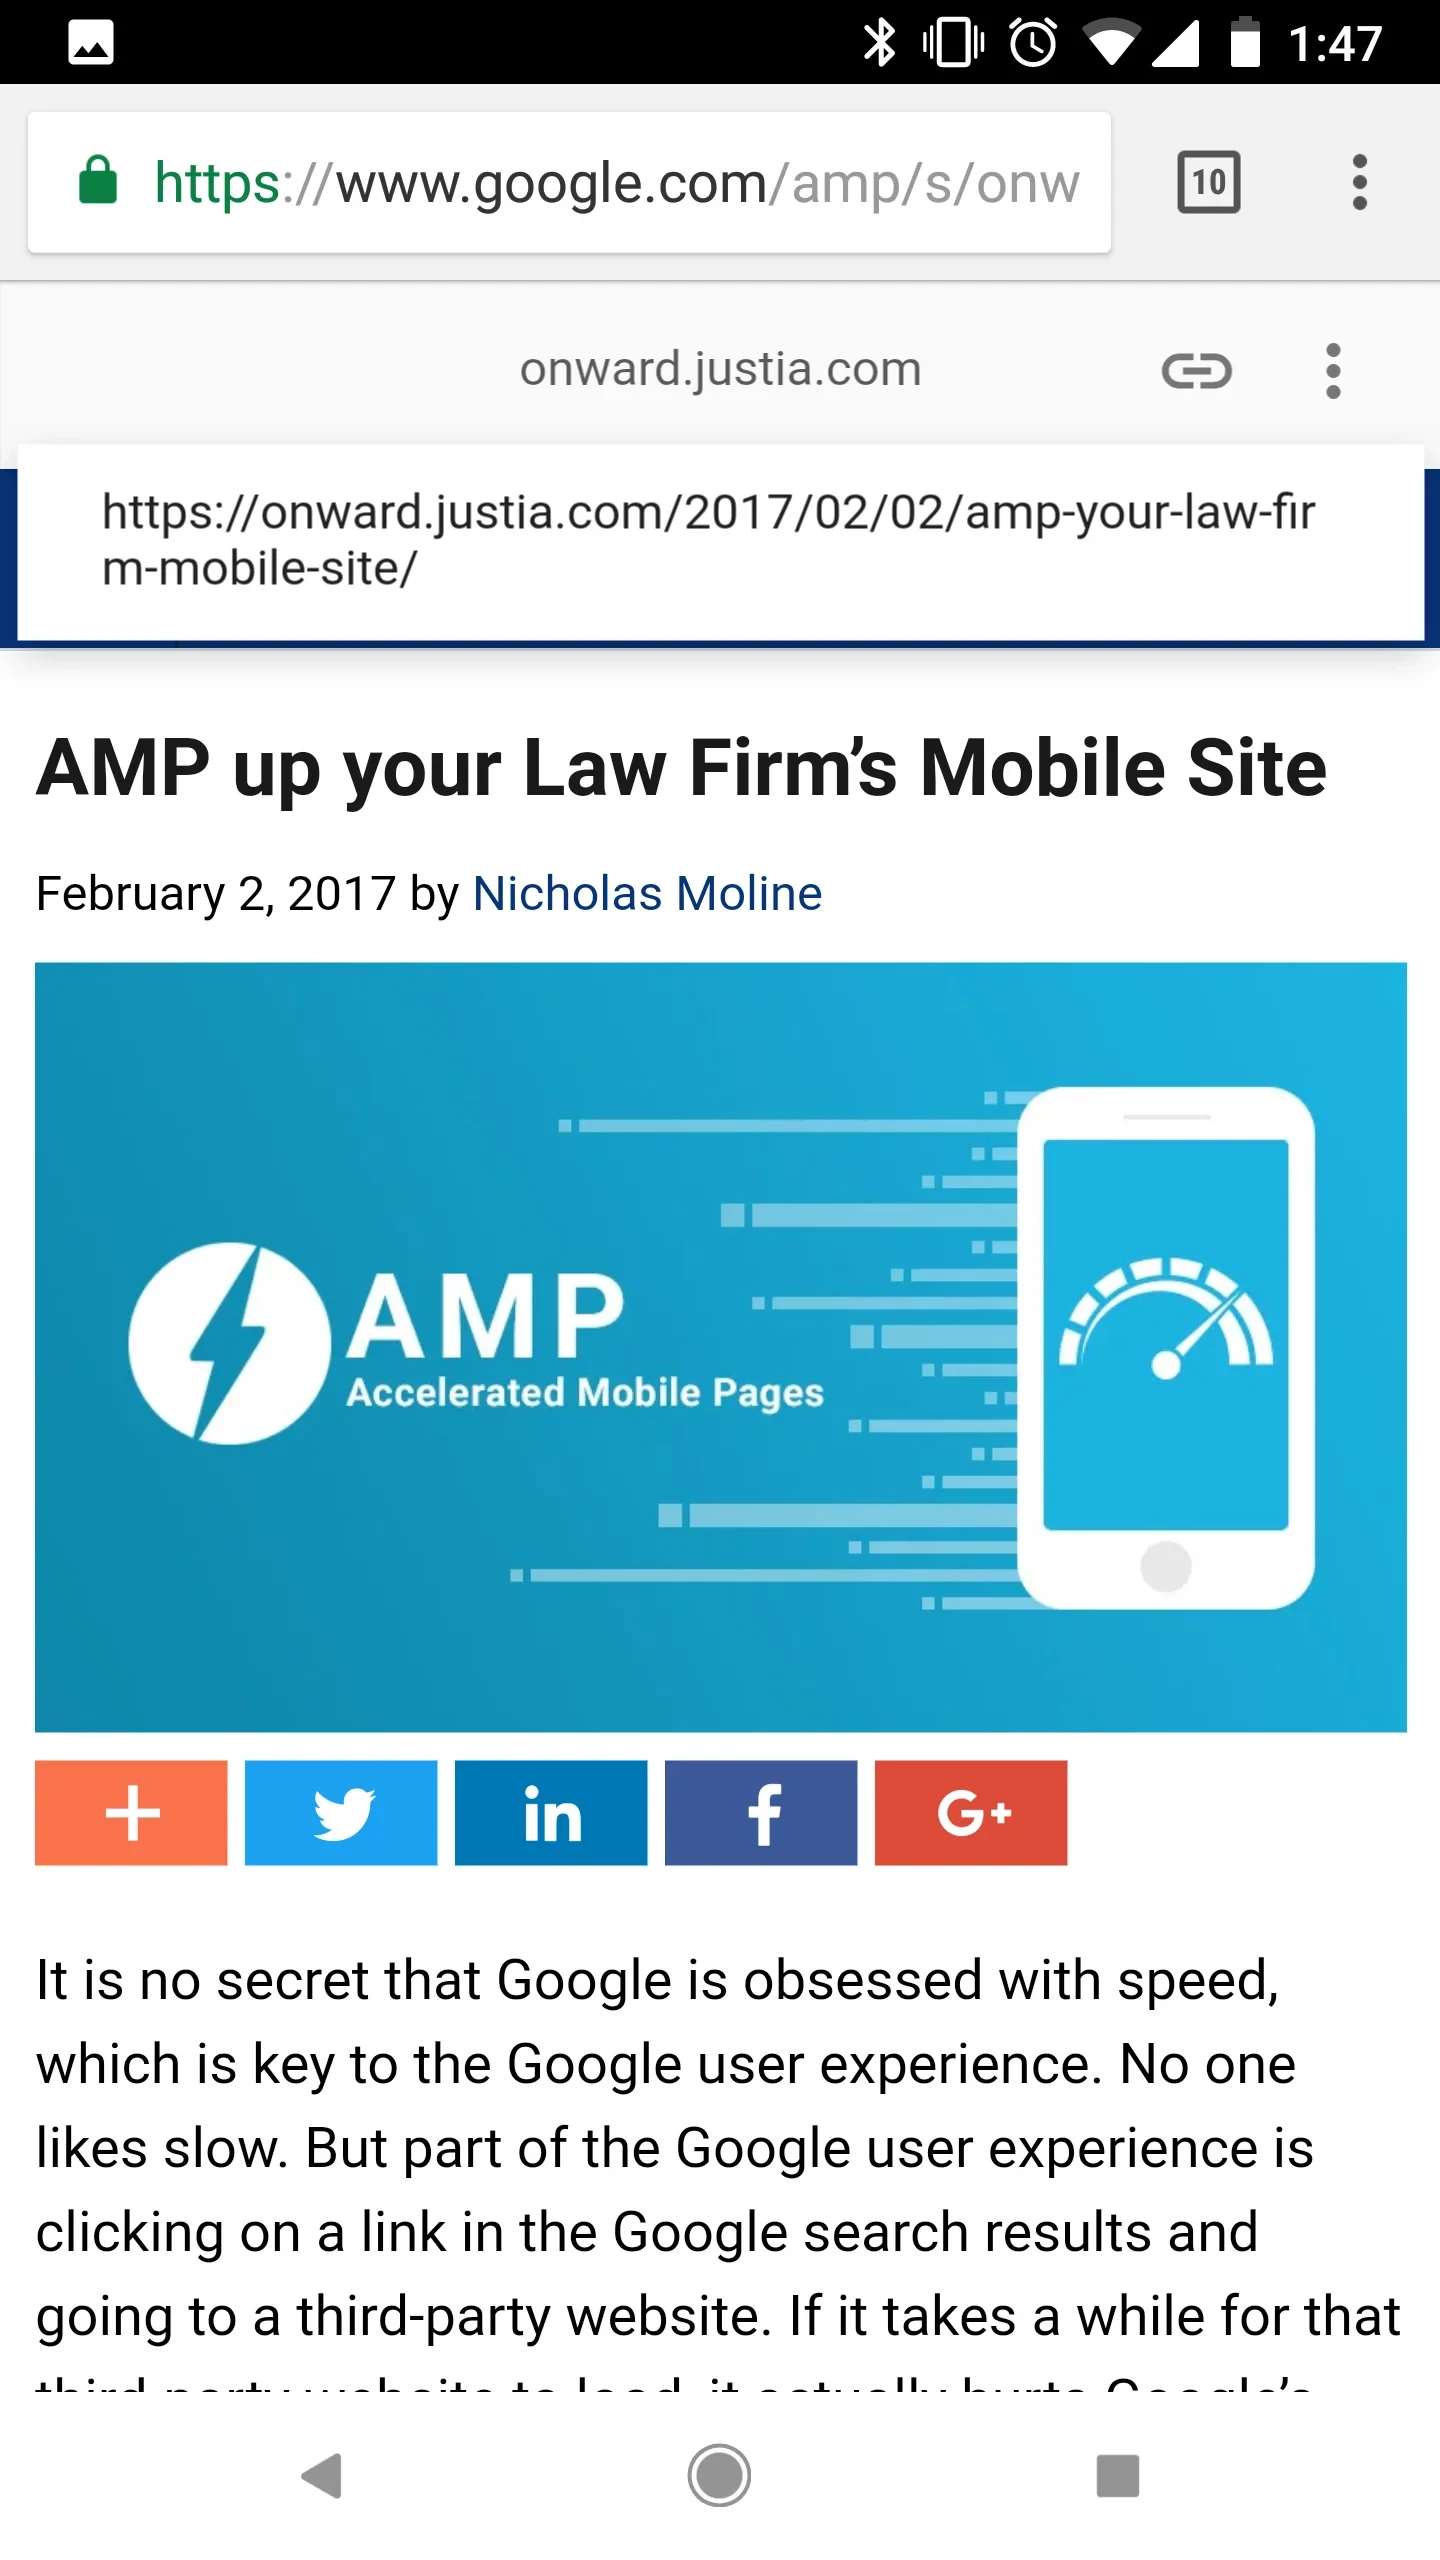 AMP Rendered page showing Google URL